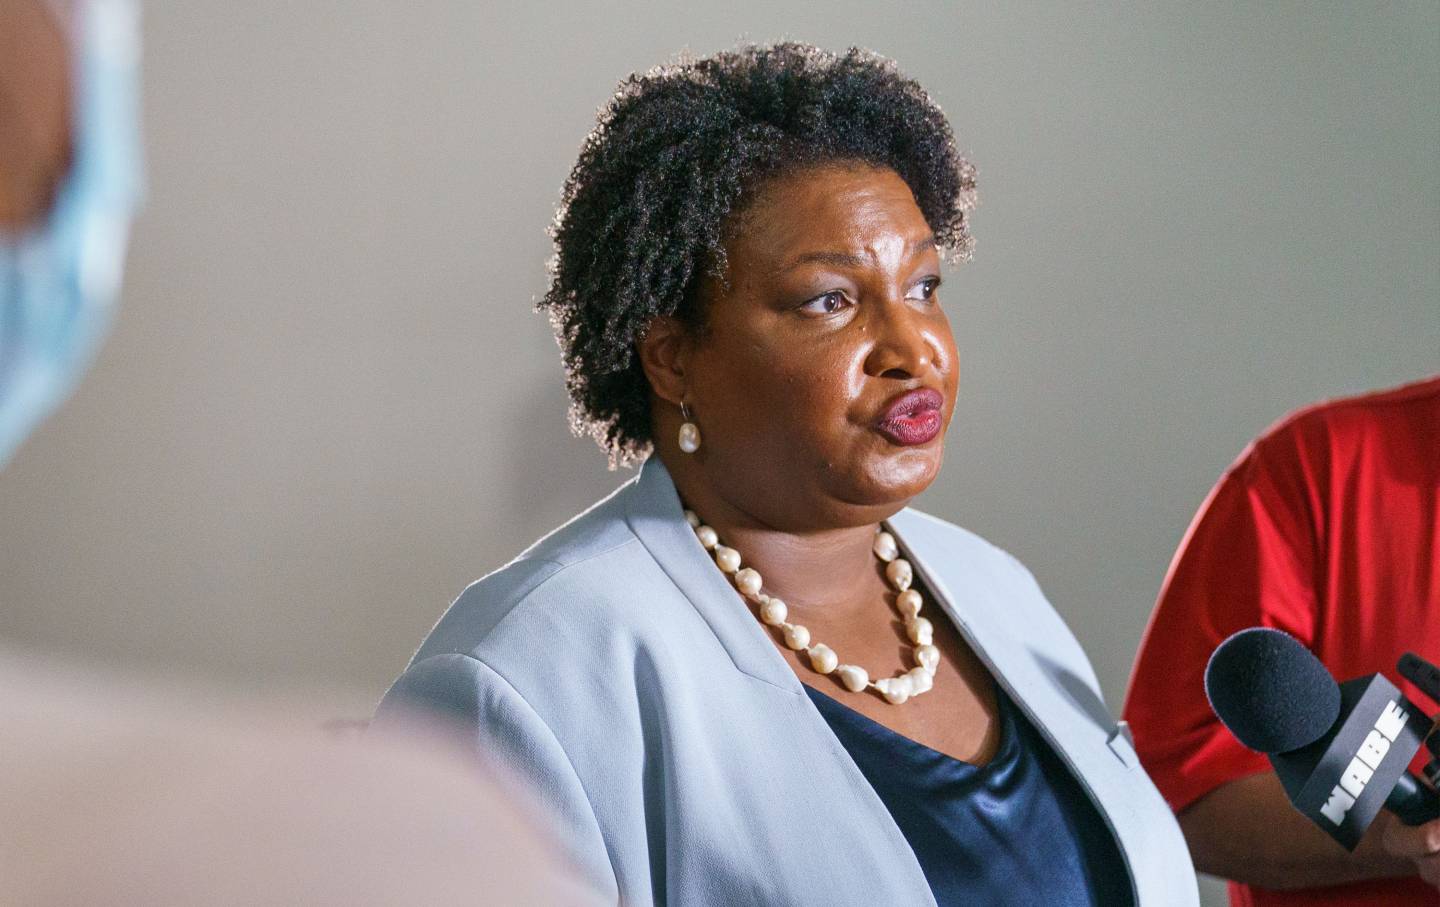 Georgia Governor Brian Kemp Plays the “Angry Black Woman” Card on Stacey Abrams The Nation